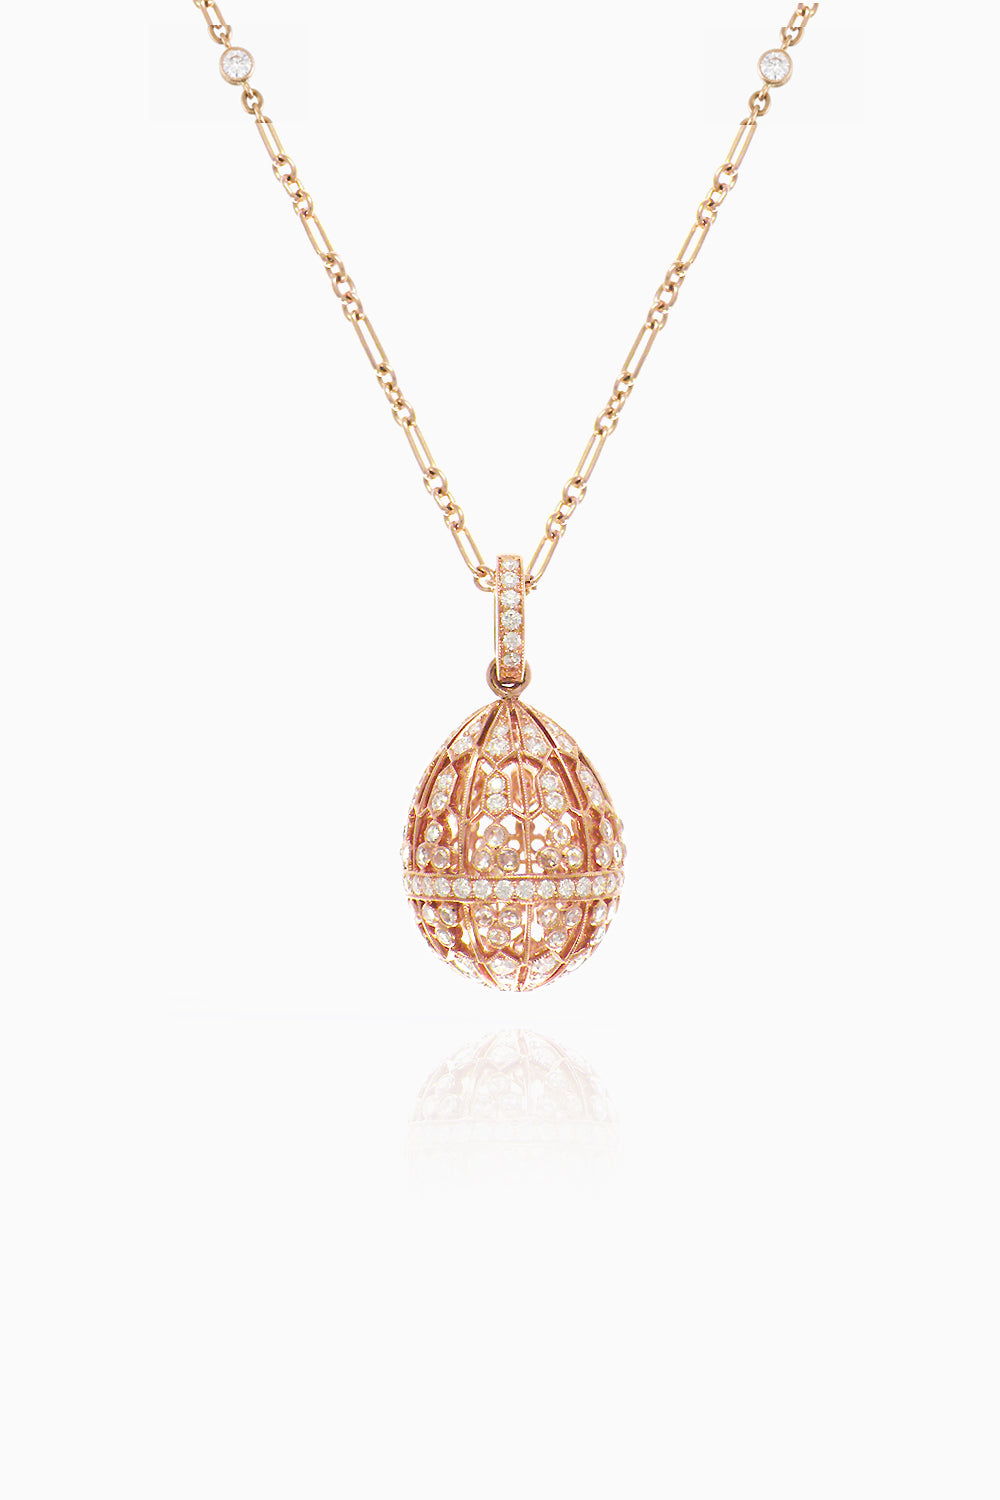 The Pride Emotion Pendant in Rose Gold